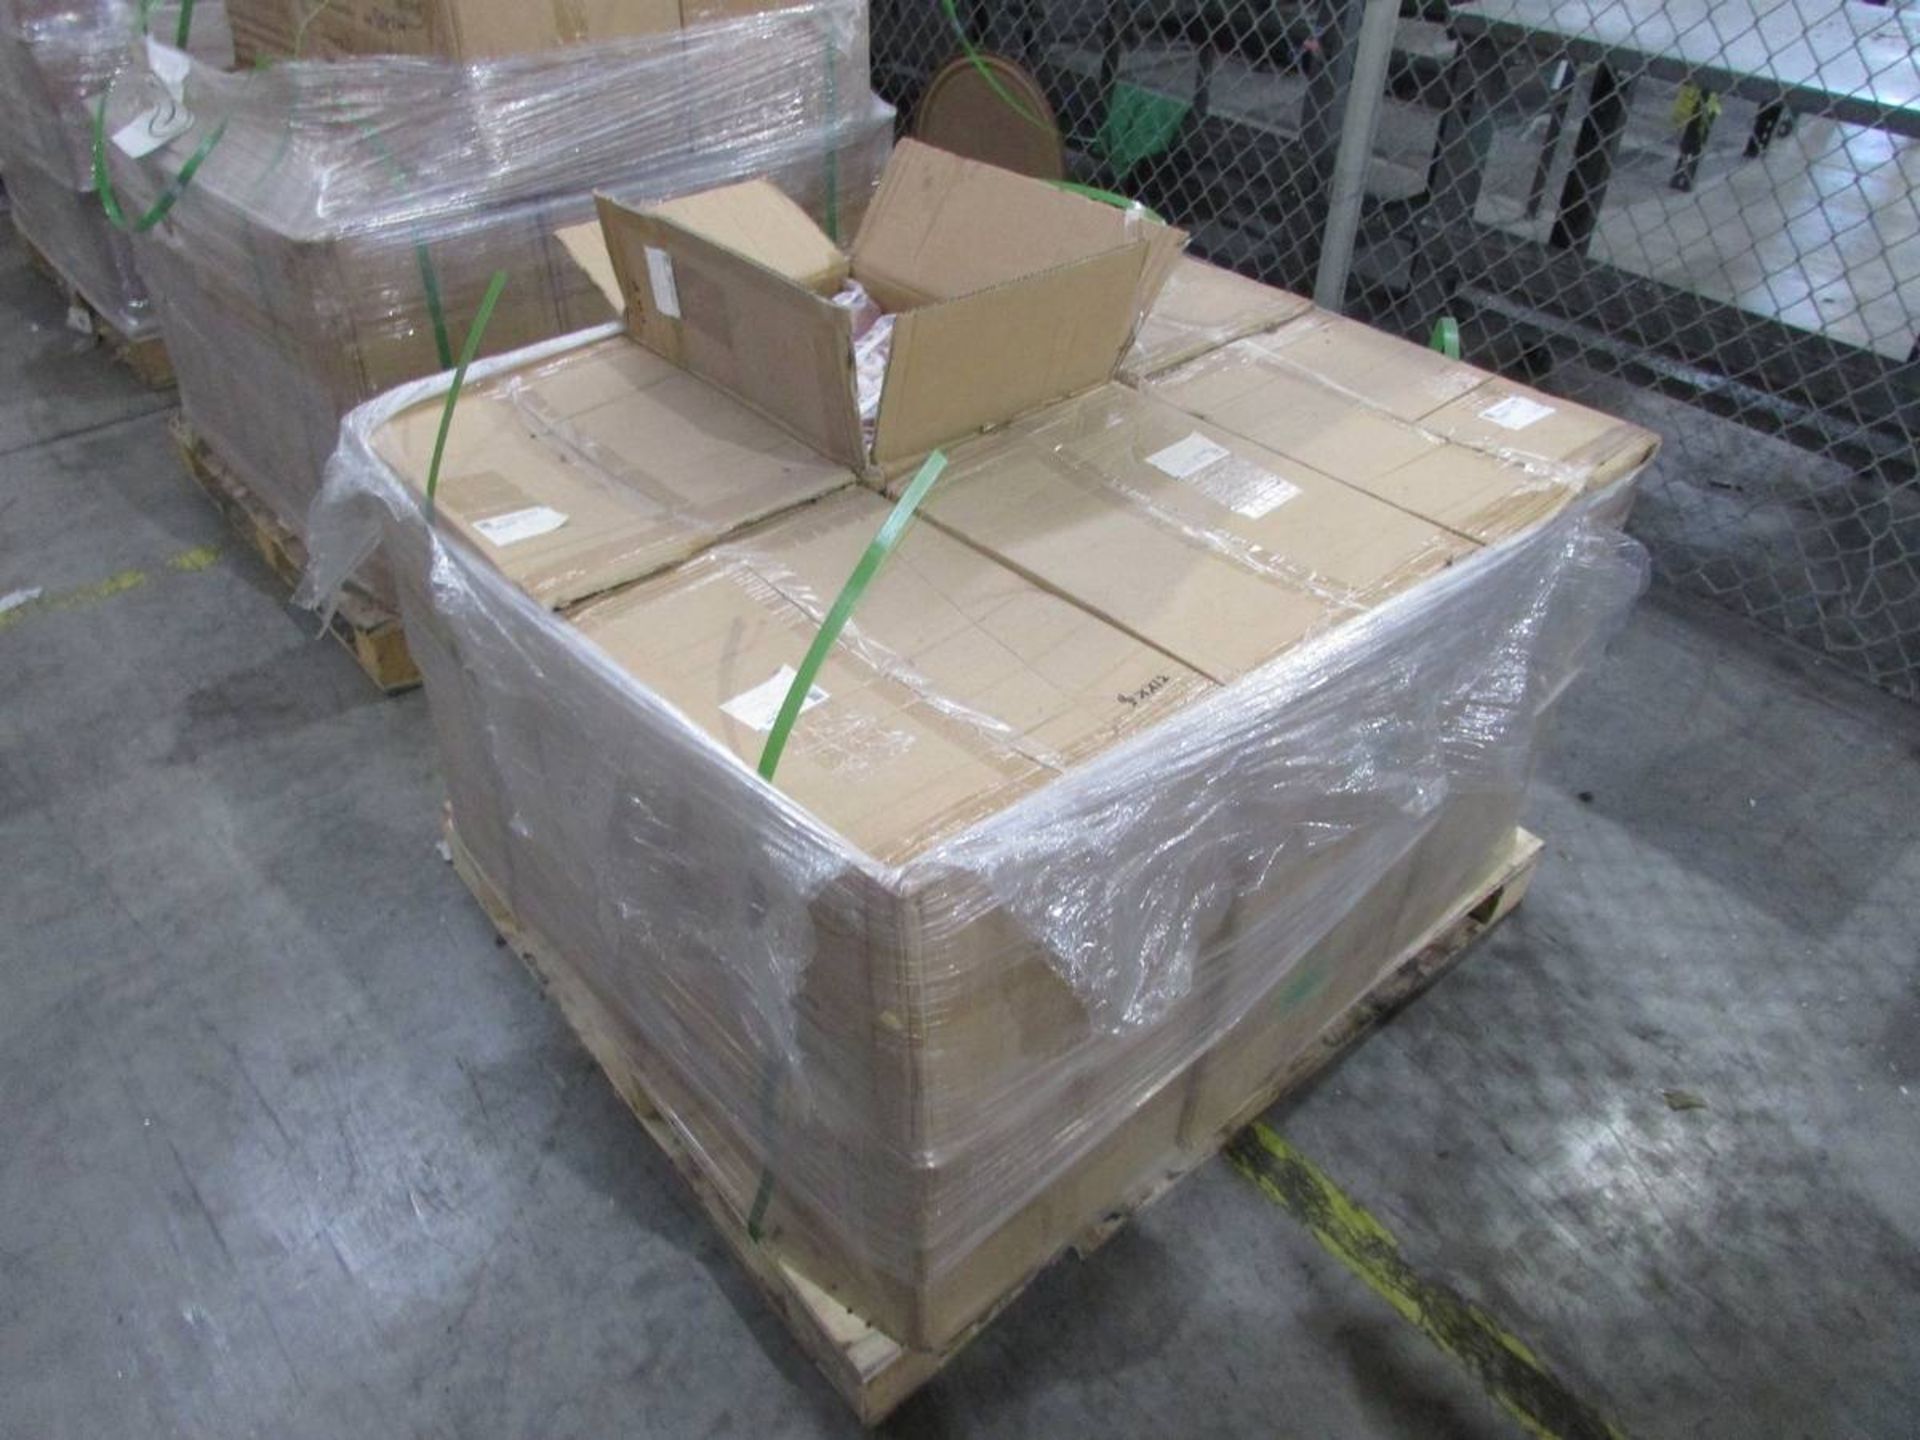 Suzhou Noble Industrial Supply 31XX-3400 Pallets of Screen Filters - Image 5 of 8